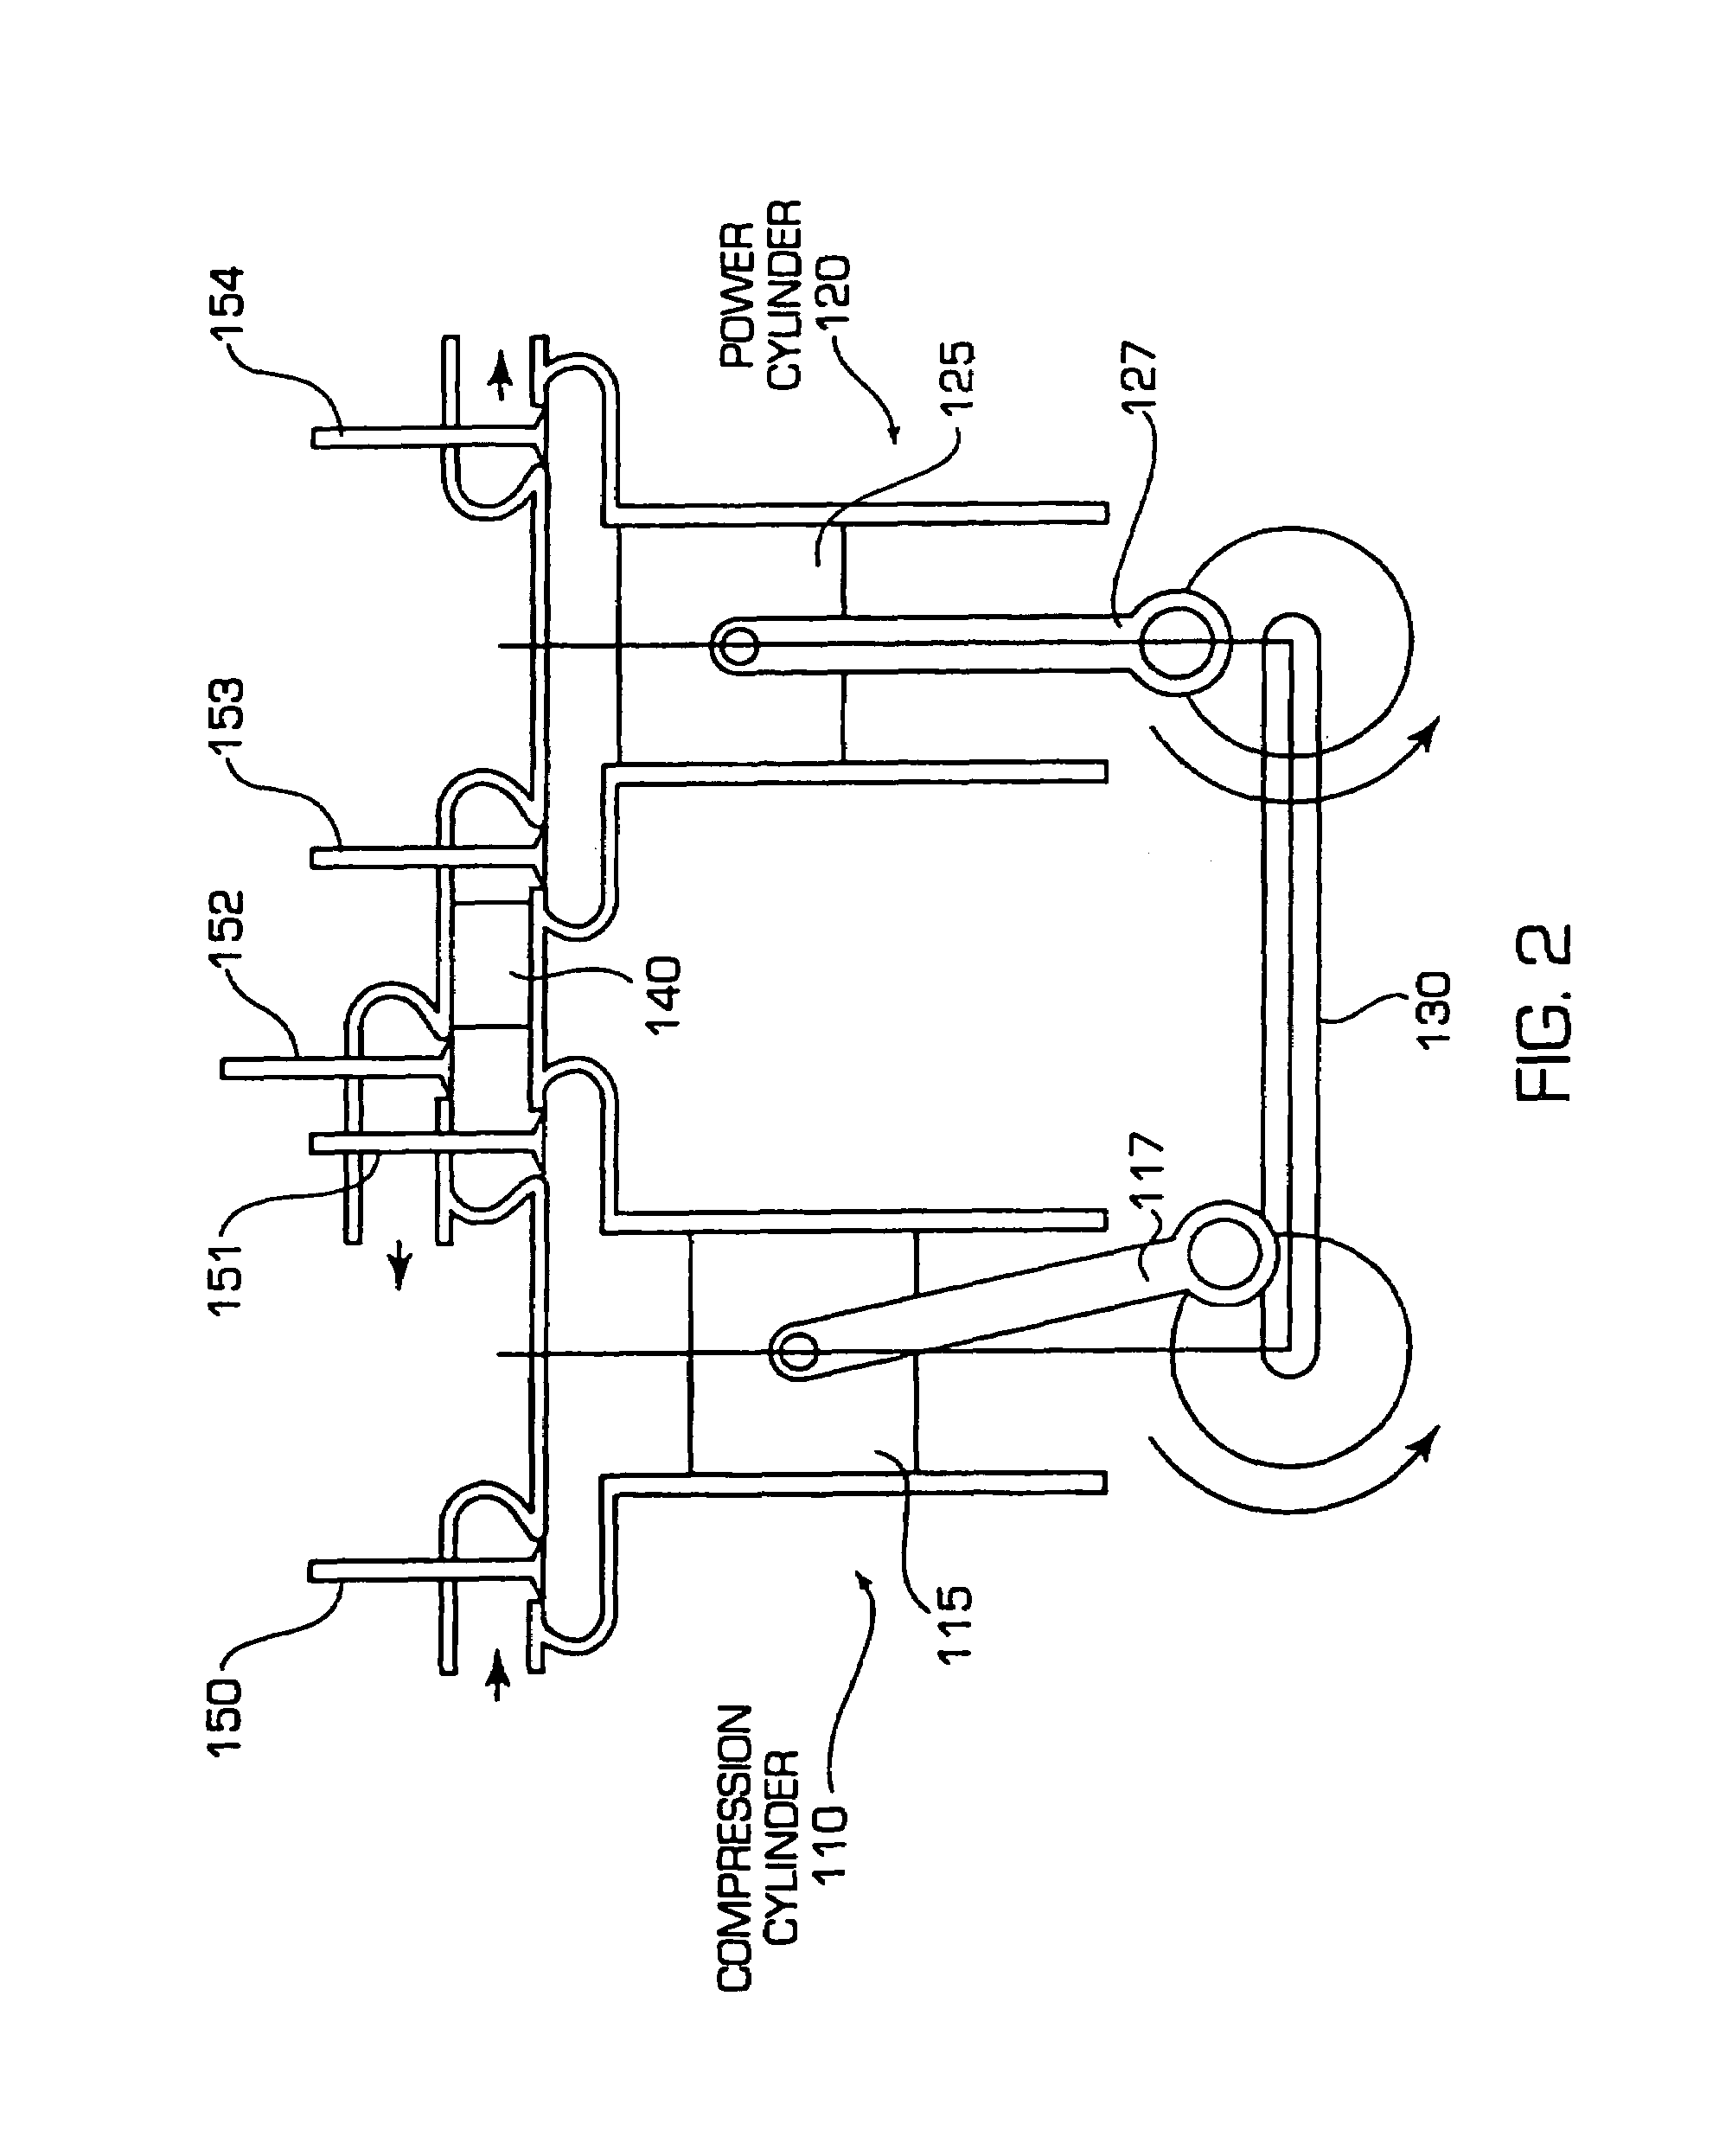 Internal combustion engine with regenerator, hot air ignition, and naturally aspirated engine control